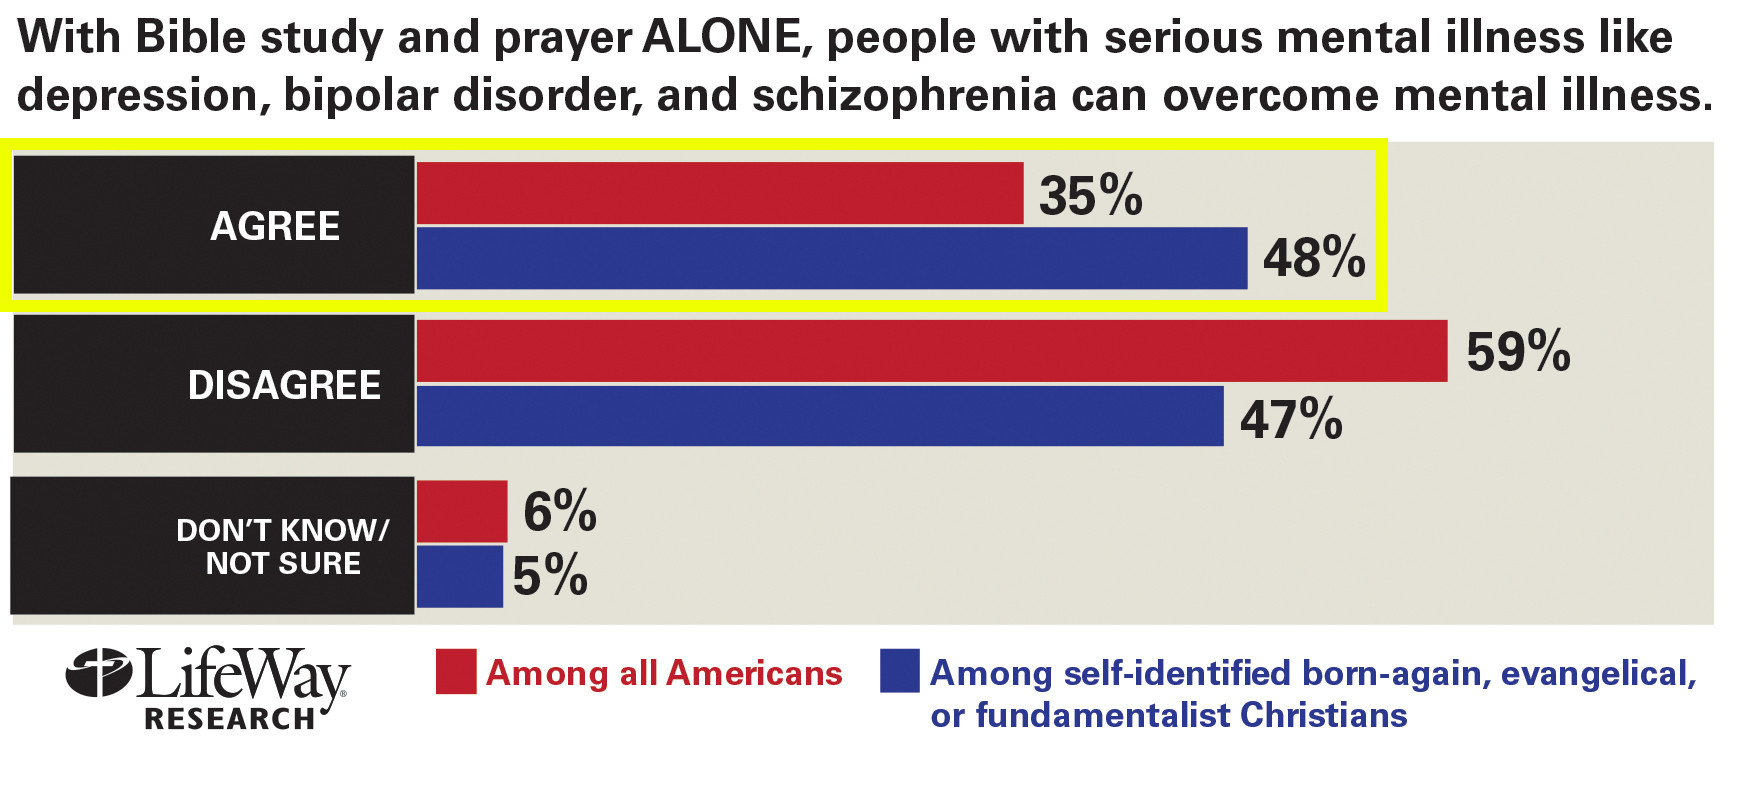 For Half of Evangelicals and a Third of All Americans, the Solution to Mental Illness is Jesus